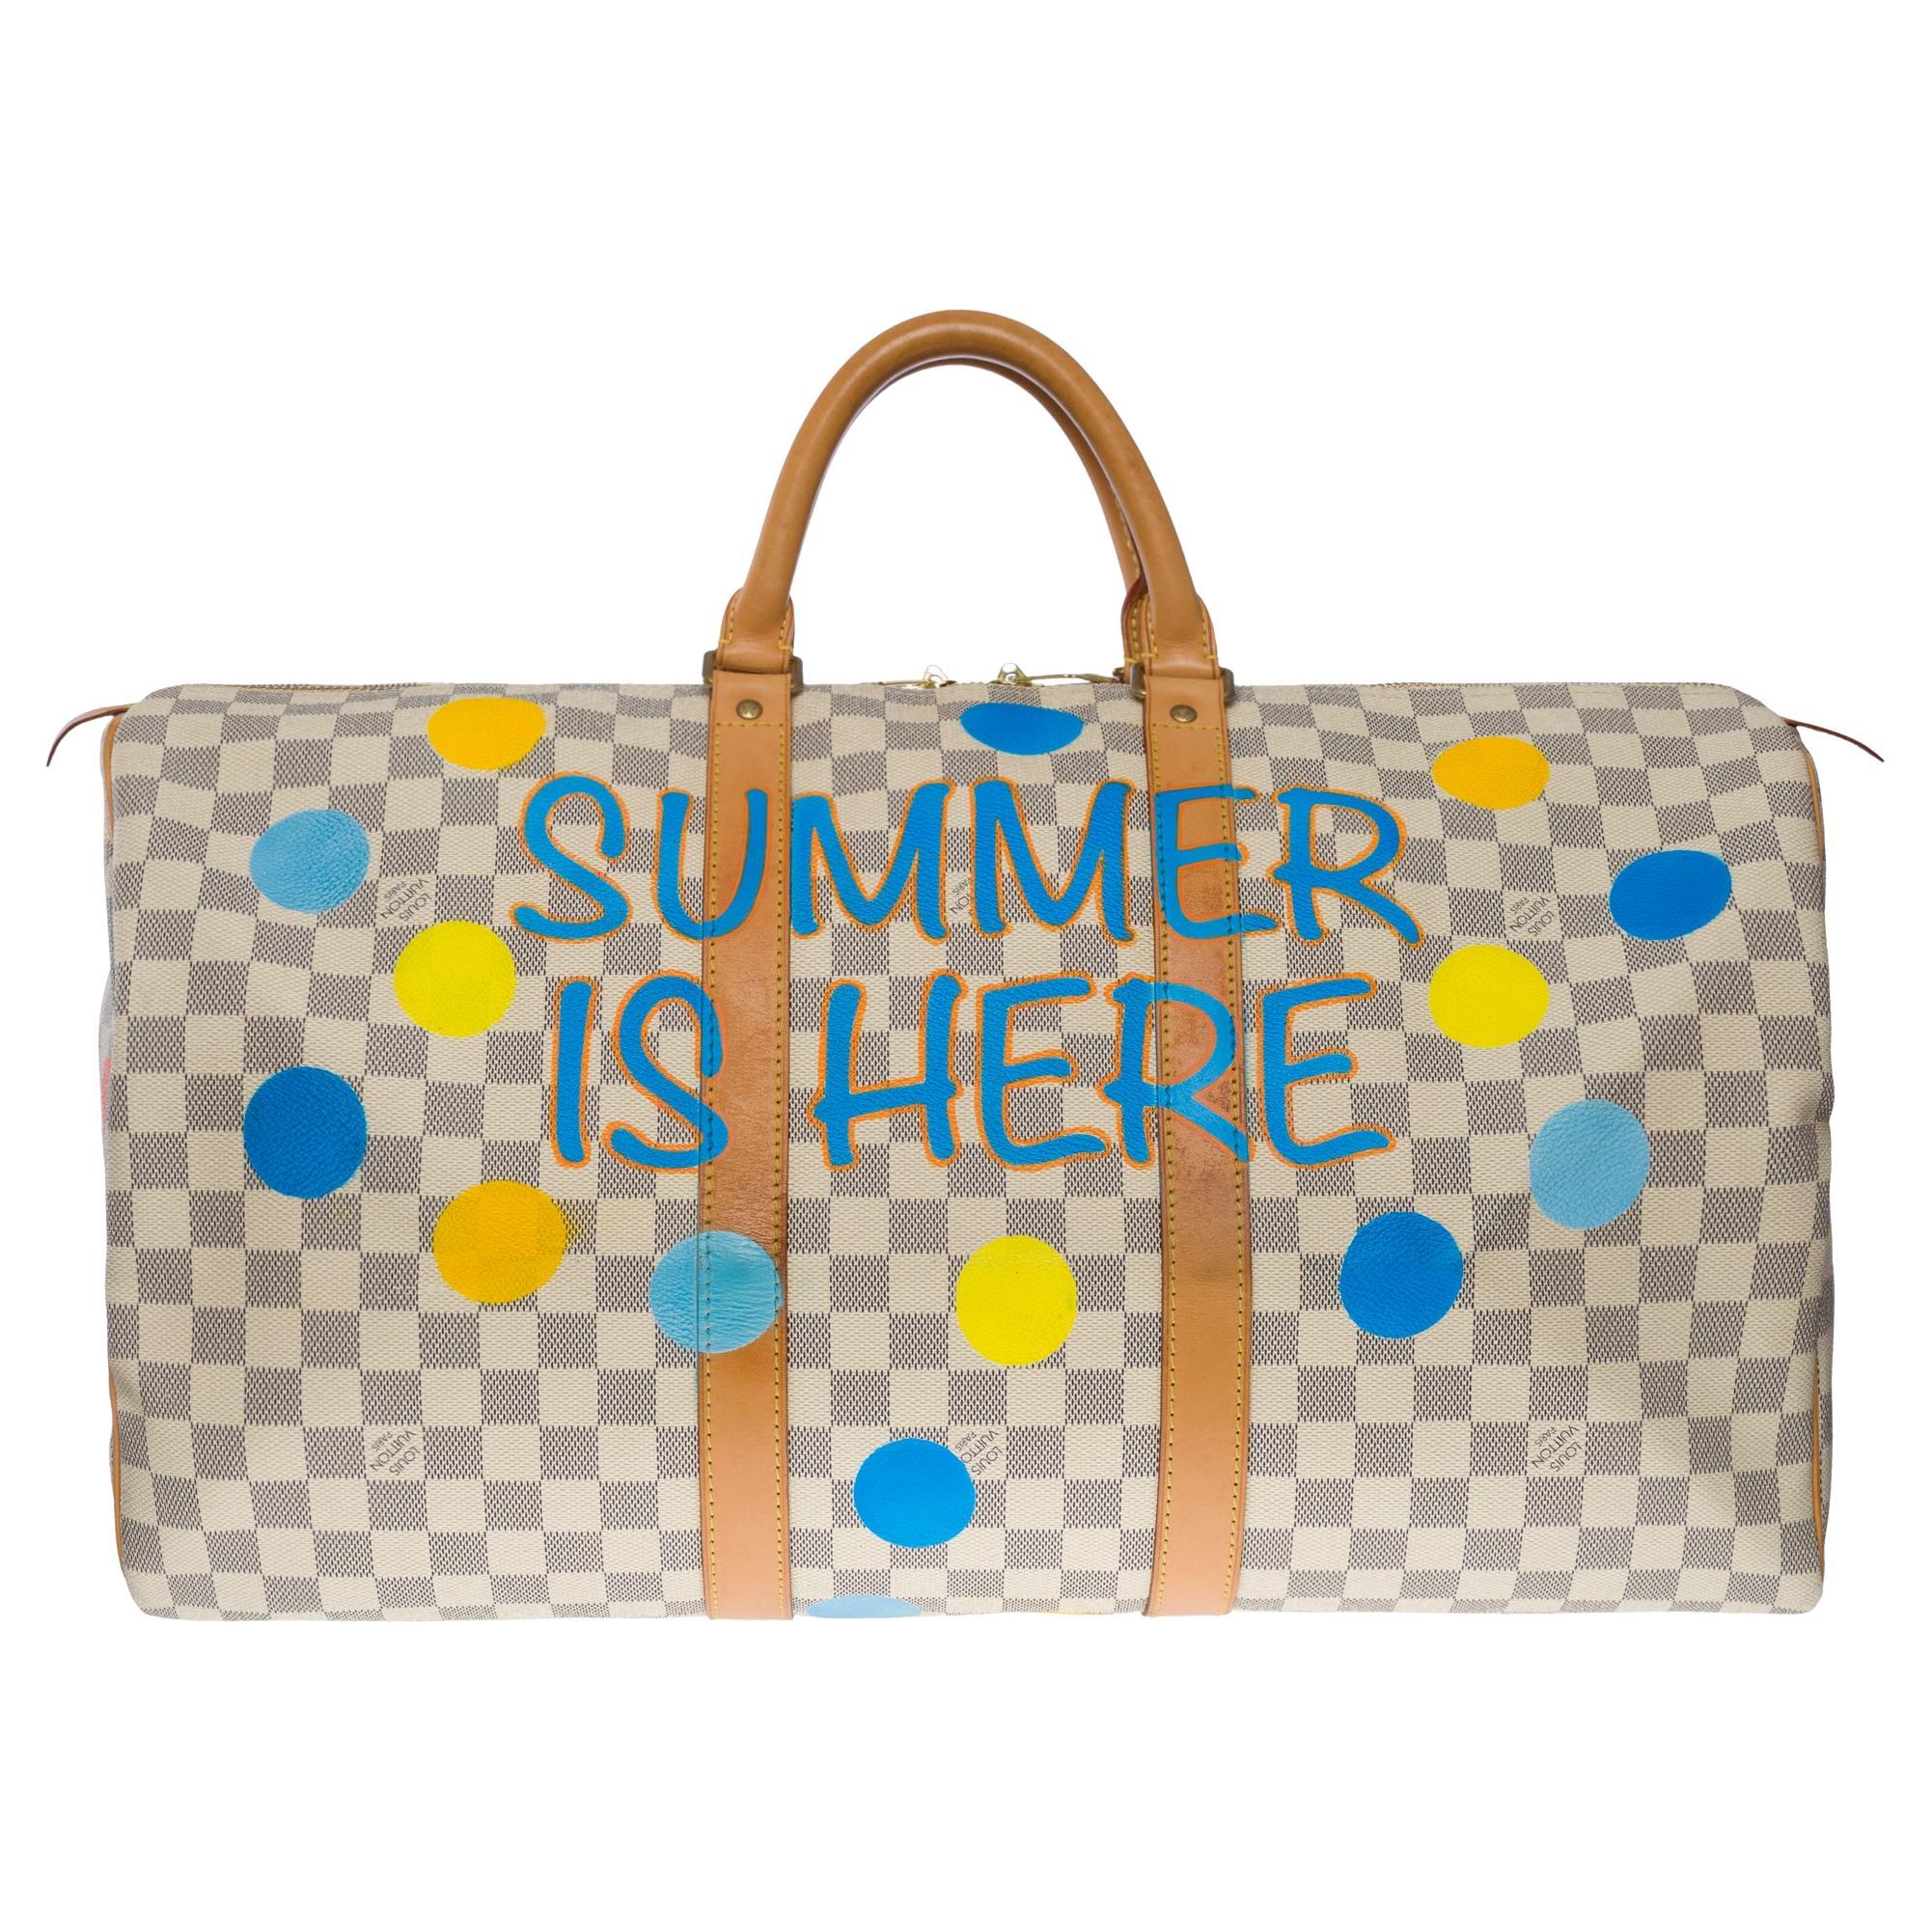 Customized "Summer X Spring" Louis Vuitton Keepall 50 travel bag in azure canvas For Sale